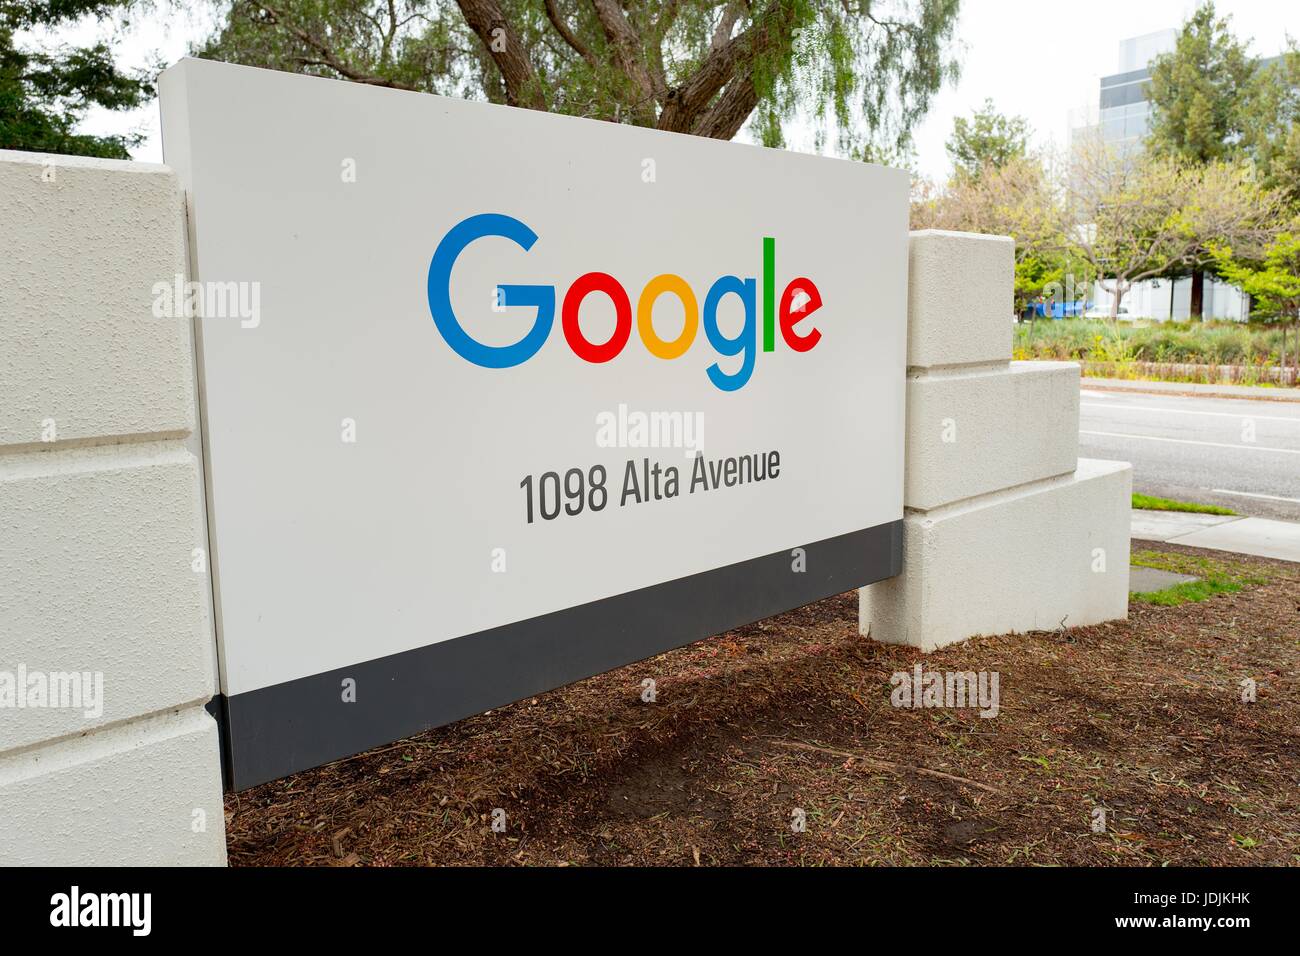 Signage for Google Inc at the Googleplex, the Silicon Valley headquarters of search engine and technology company Google Inc, Mountain View, California, April 7, 2017. Stock Photo